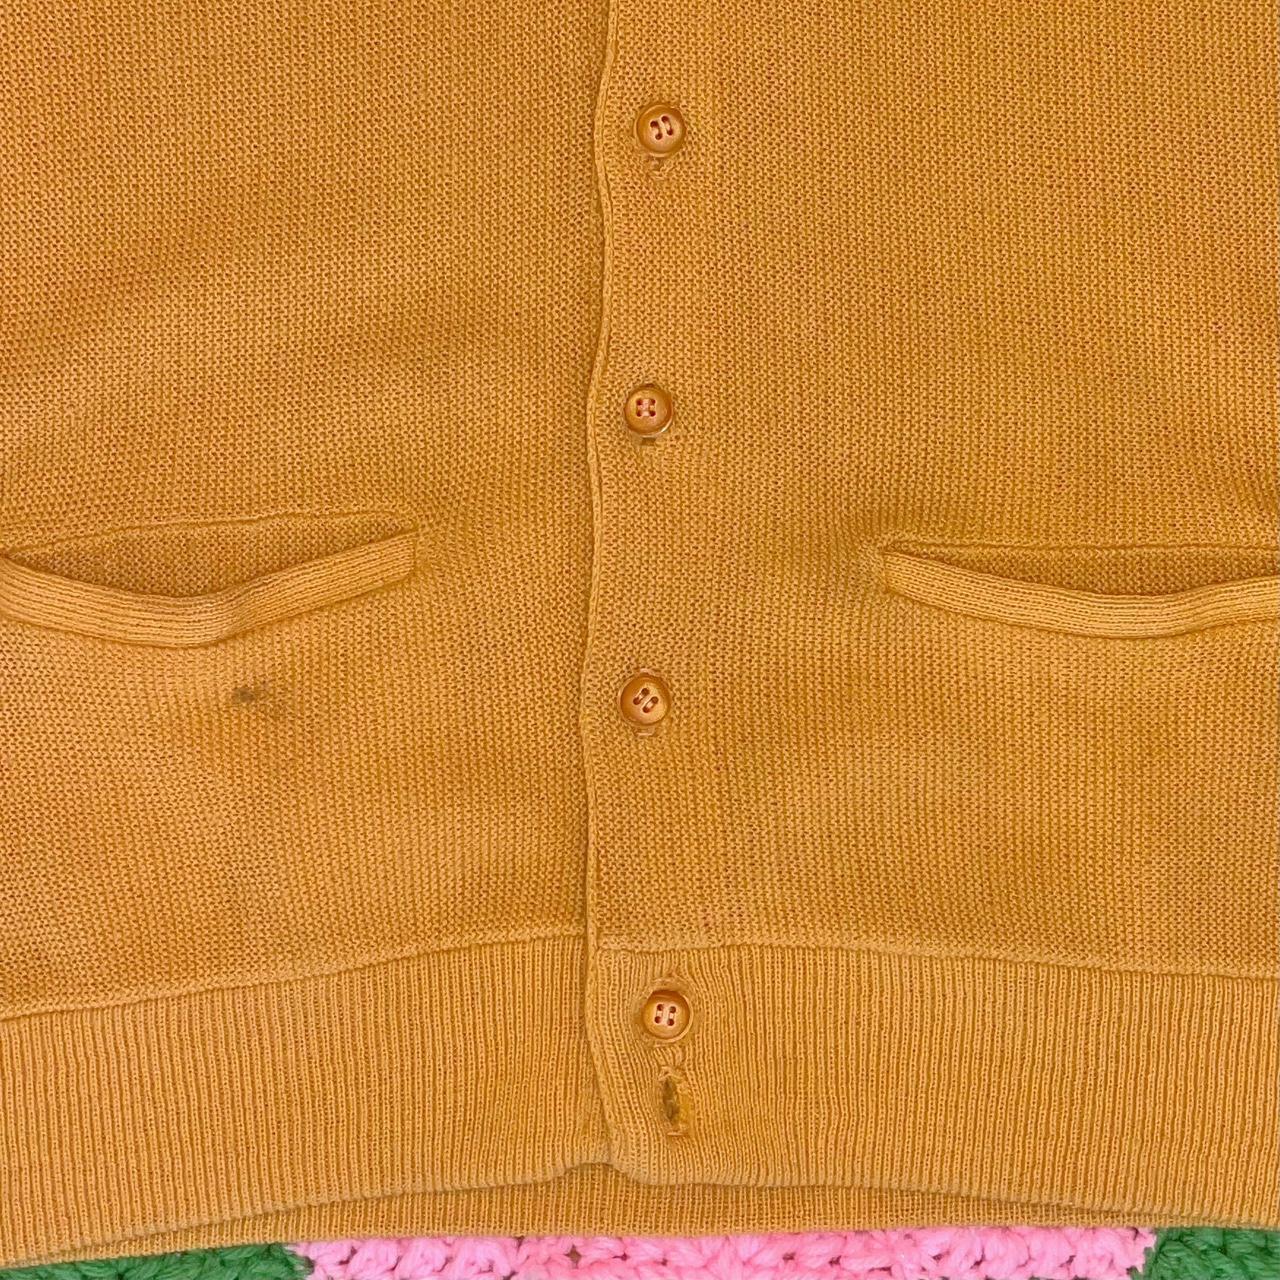 🦁cozy vintage cardigan🦁 perfect 70s sweater for... - Depop